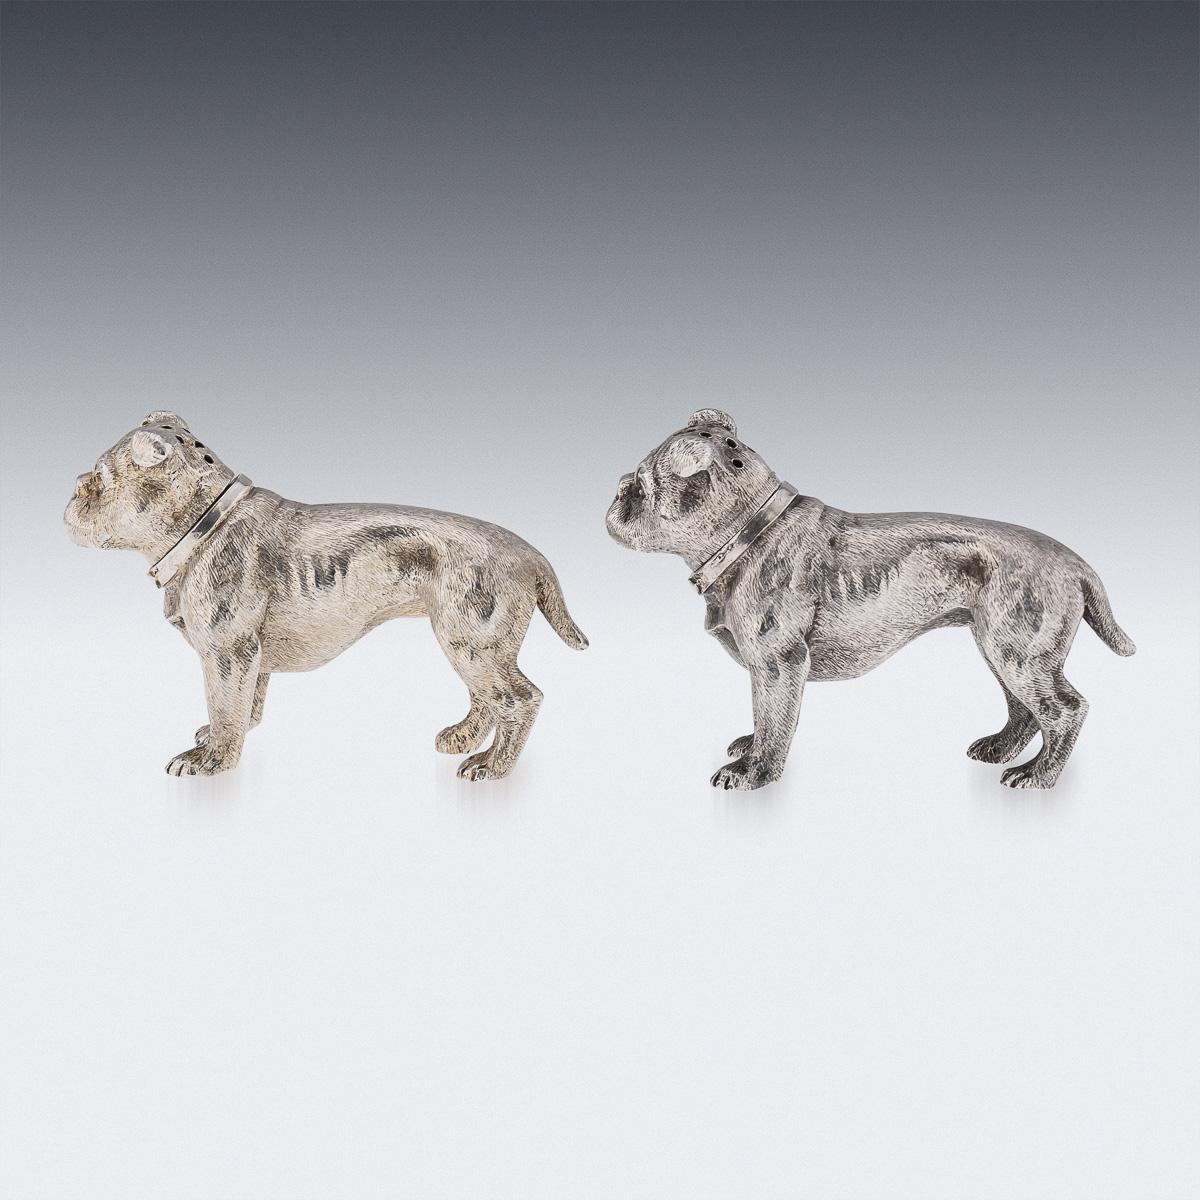 Antique early 20th Century Edwardian very rare novelty cast solid silver pair of salts, realistically modelled as a bulldog, with pull off heads. Heads hallmarked English silver (925 standard), London, year 1908 (n), Maker WH (William Edward